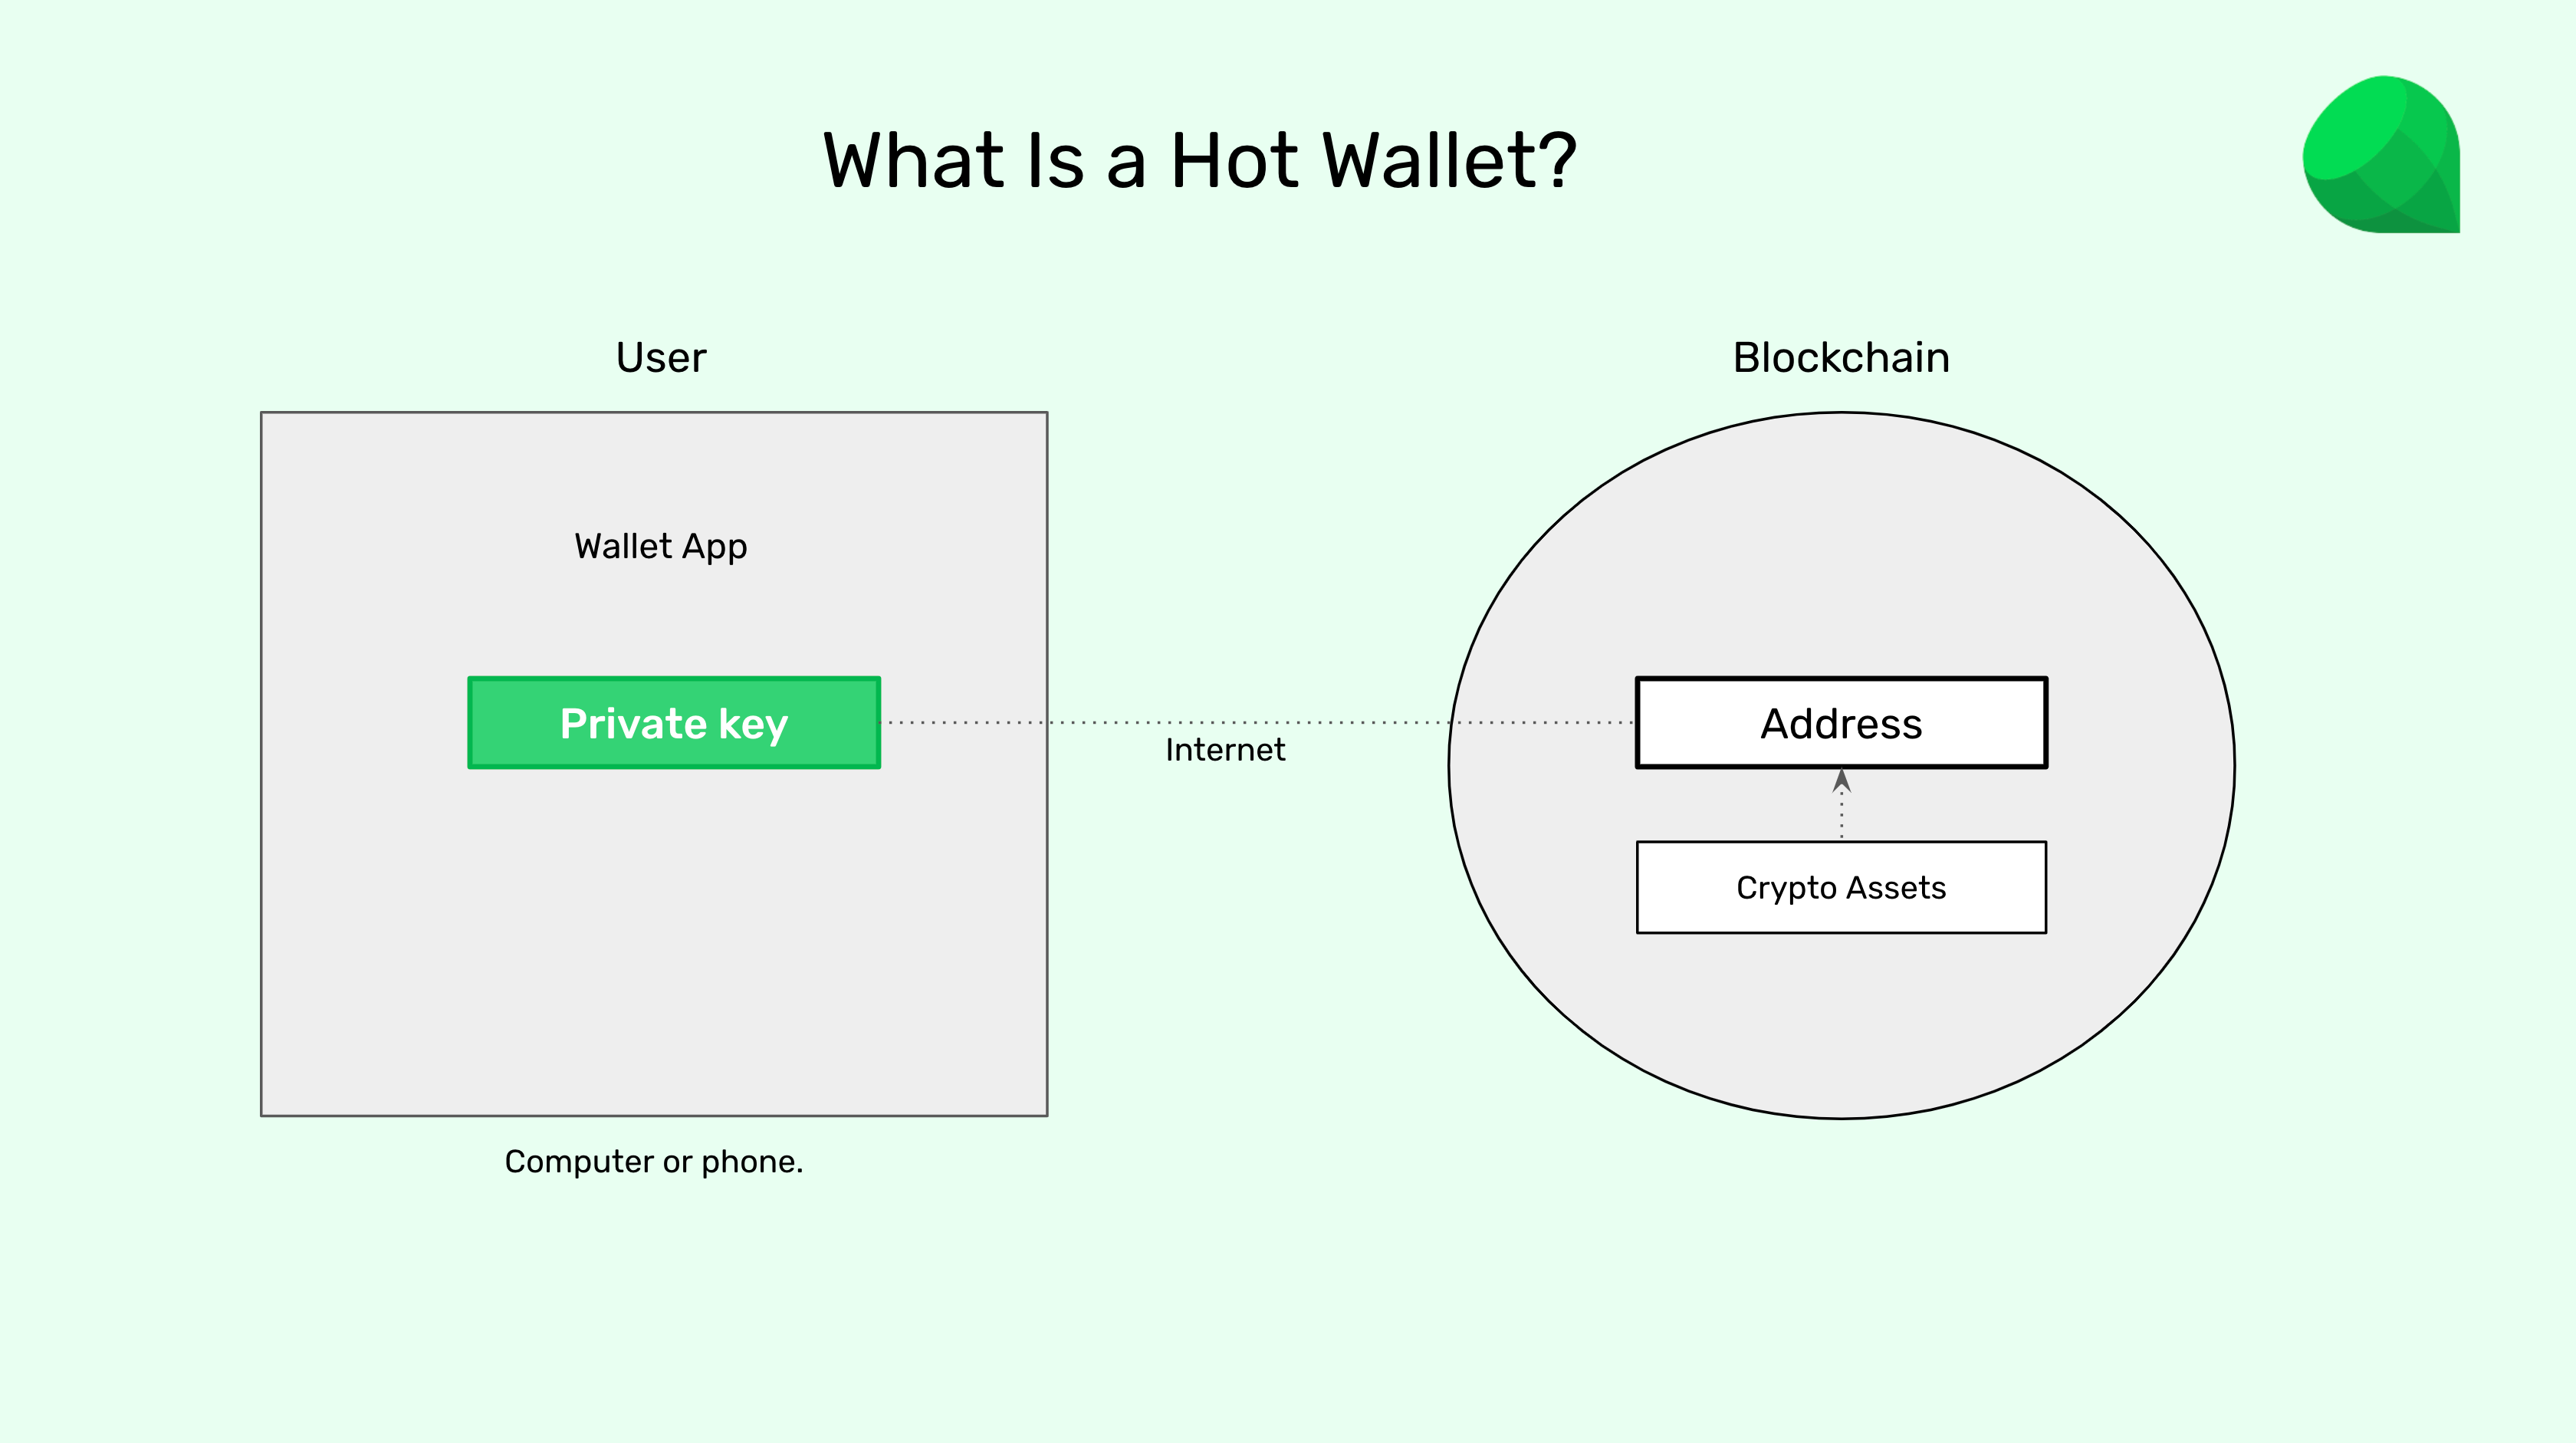 What is a hot wallet?